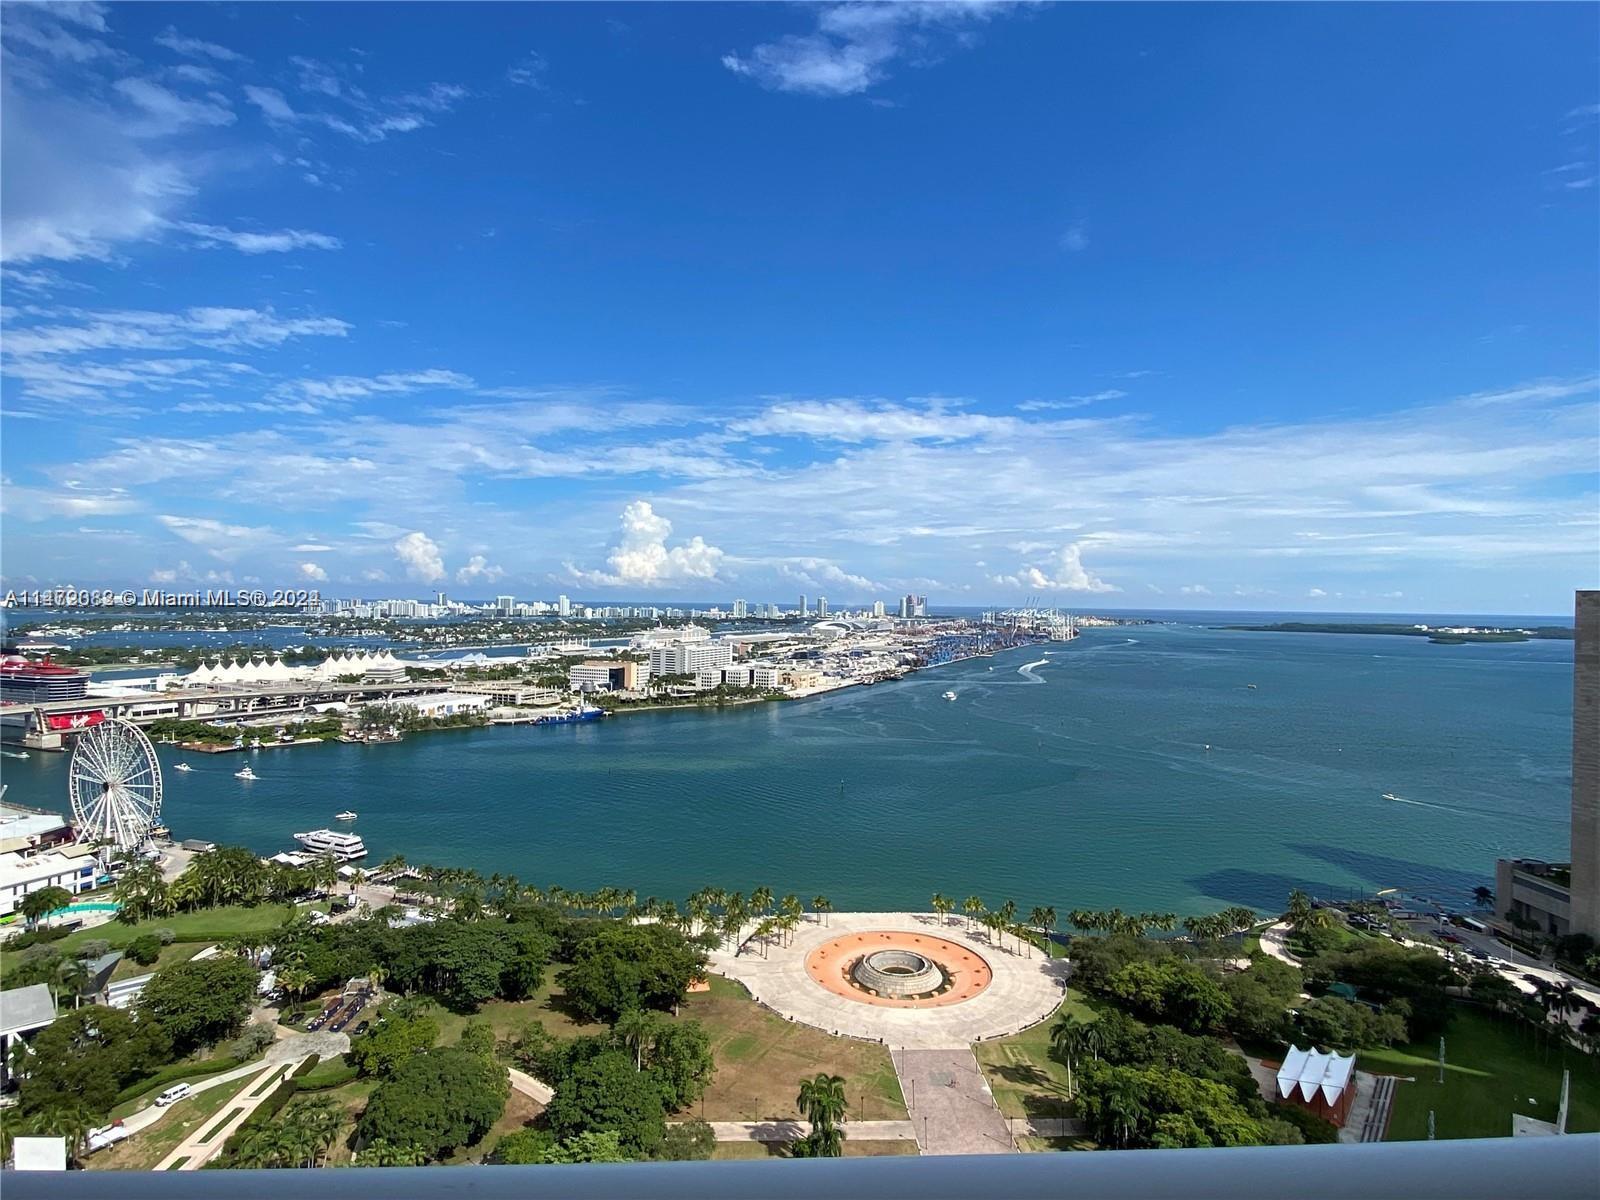 Enjoy luxury urban living from this spacious corner 3 bdrms 2 bths condo with direct water views of Biscayne Bay
and Miami Skyline. Italian kitchen cabinets with state-of-art appliances, modern baths with marble finishes.
Building amenities includes: 3-story lobby created by world-renowned Rockwell Group provides an inviting
ambience. Designed by the award-wining architectural firm of Sieger; Over 15,000 retail space, 24 hours valet,
concierge, a nd security, 10th floor infinity edge pool, Jacuzzi, lounge beds and cabanas, 2-level party room and
clubroom. On the 12th floor residents enjoy a 2-level spa and fitness center, along meditation and Pilates rooms.
Centrally located in Miami, residents are within minutes to SoBe, Grove, Gables, Brickell, Airport & Design District.